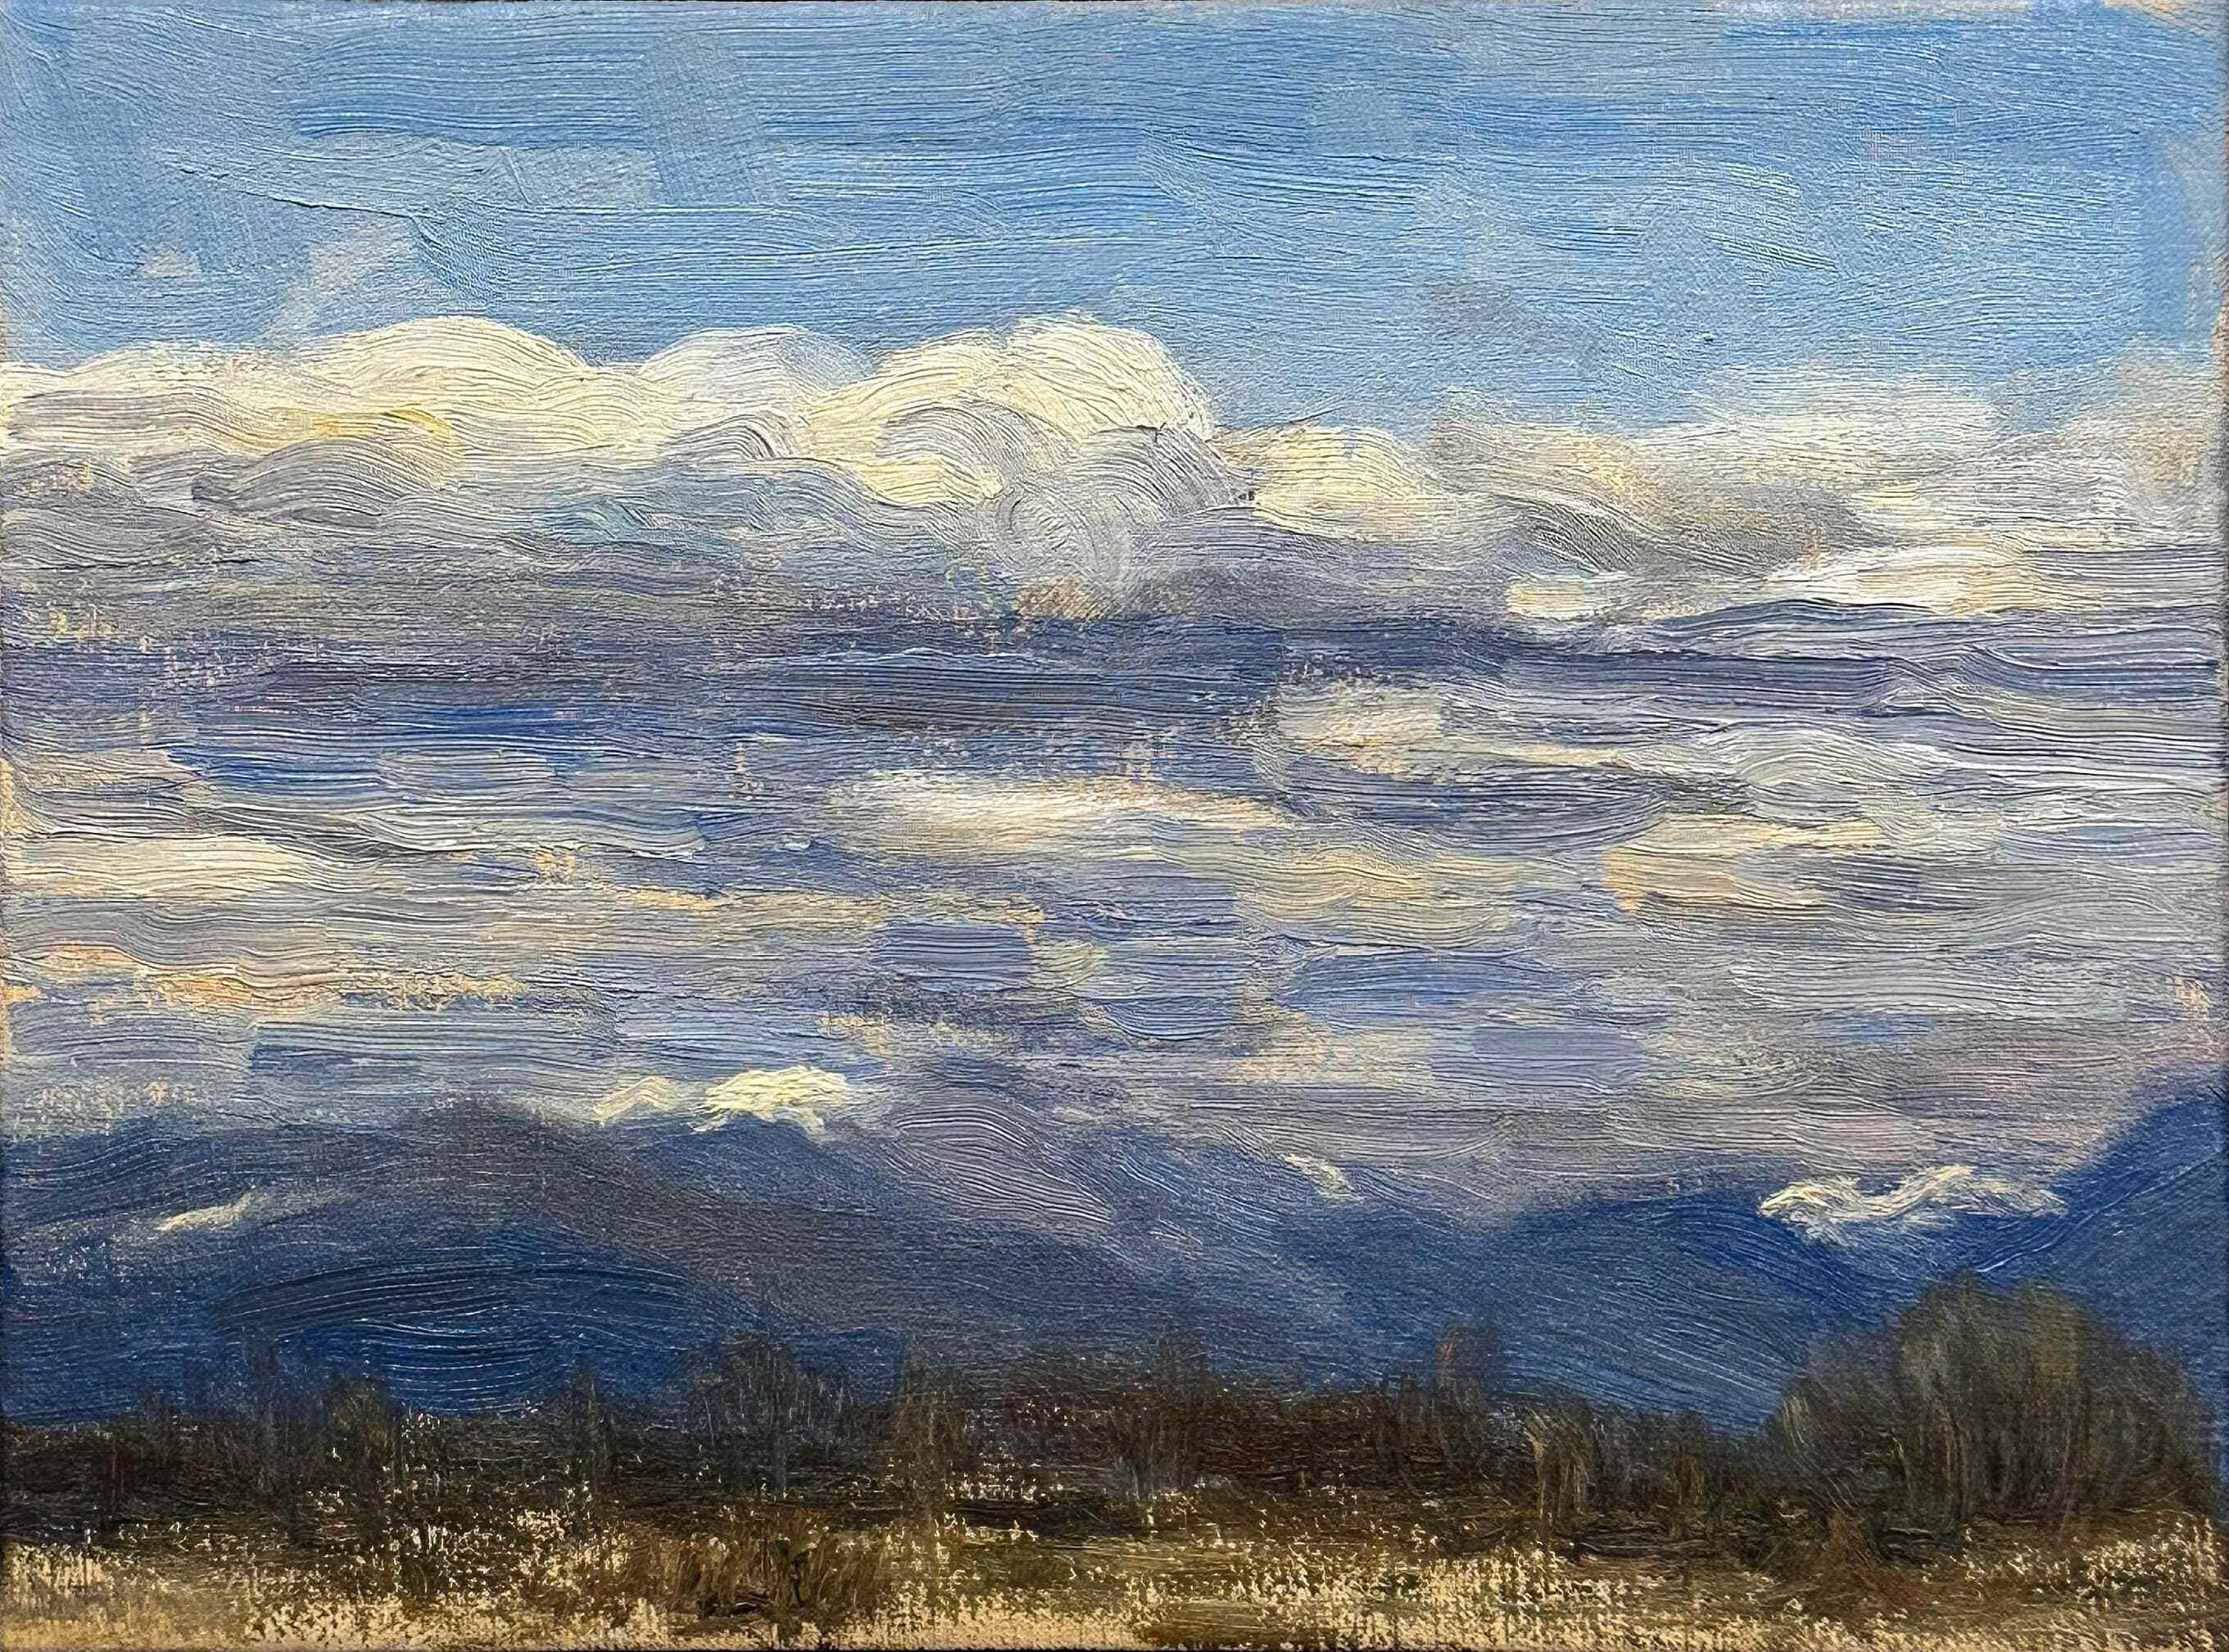 Contemporary art. Title: Shifting Clouds Over a Northern Landscape, Oil on Canvas, 9 x 12 in by Canadian artist Paul Chizik.